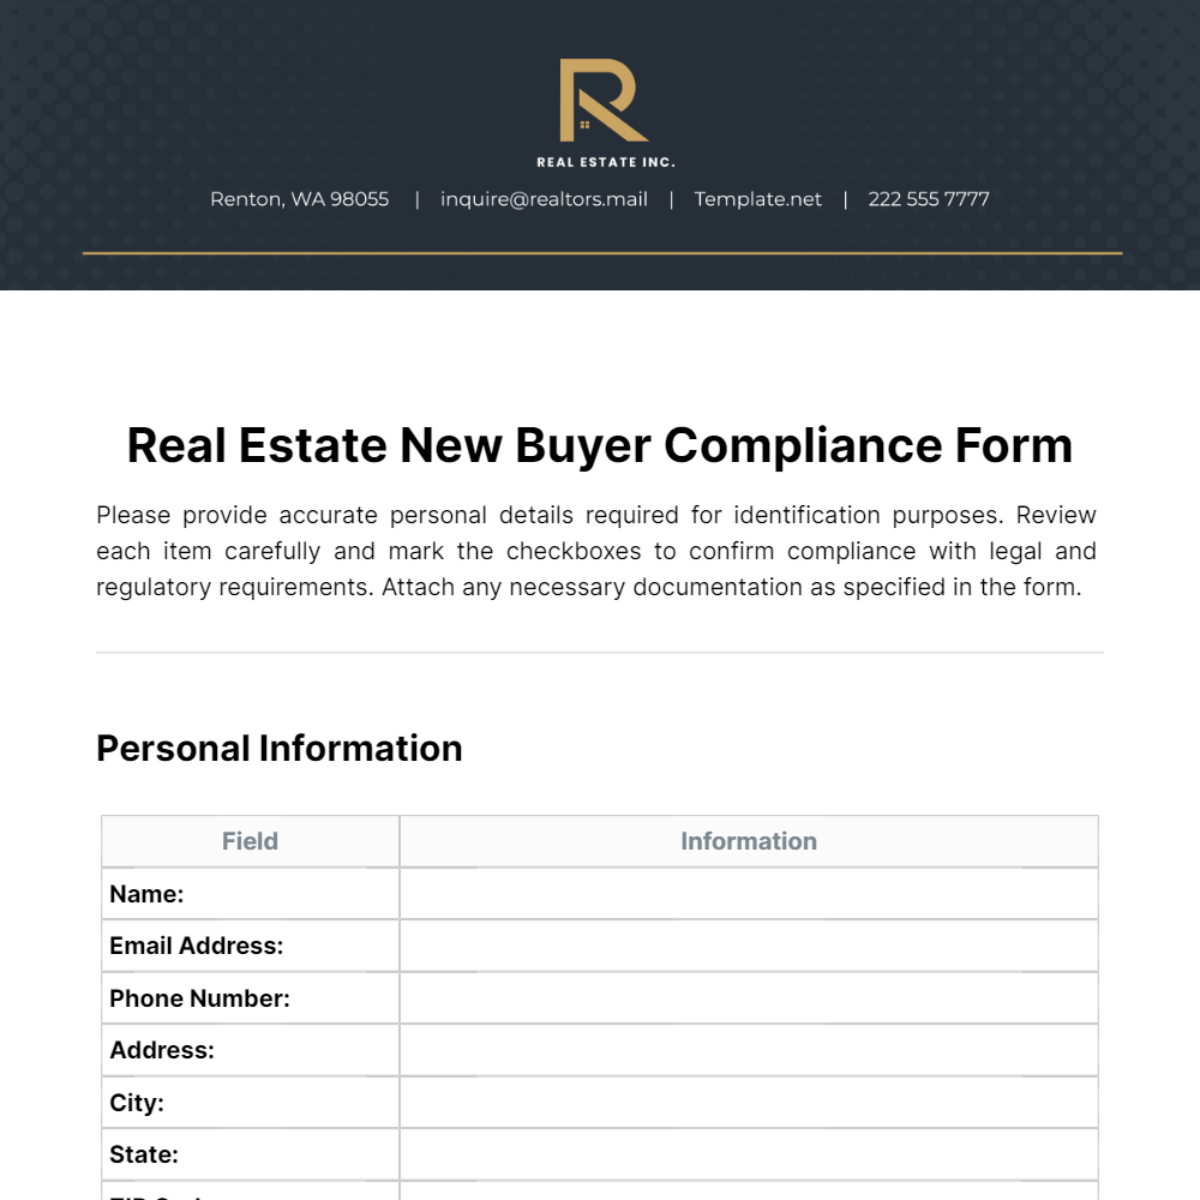 Real Estate New Buyer Compliance Form Template